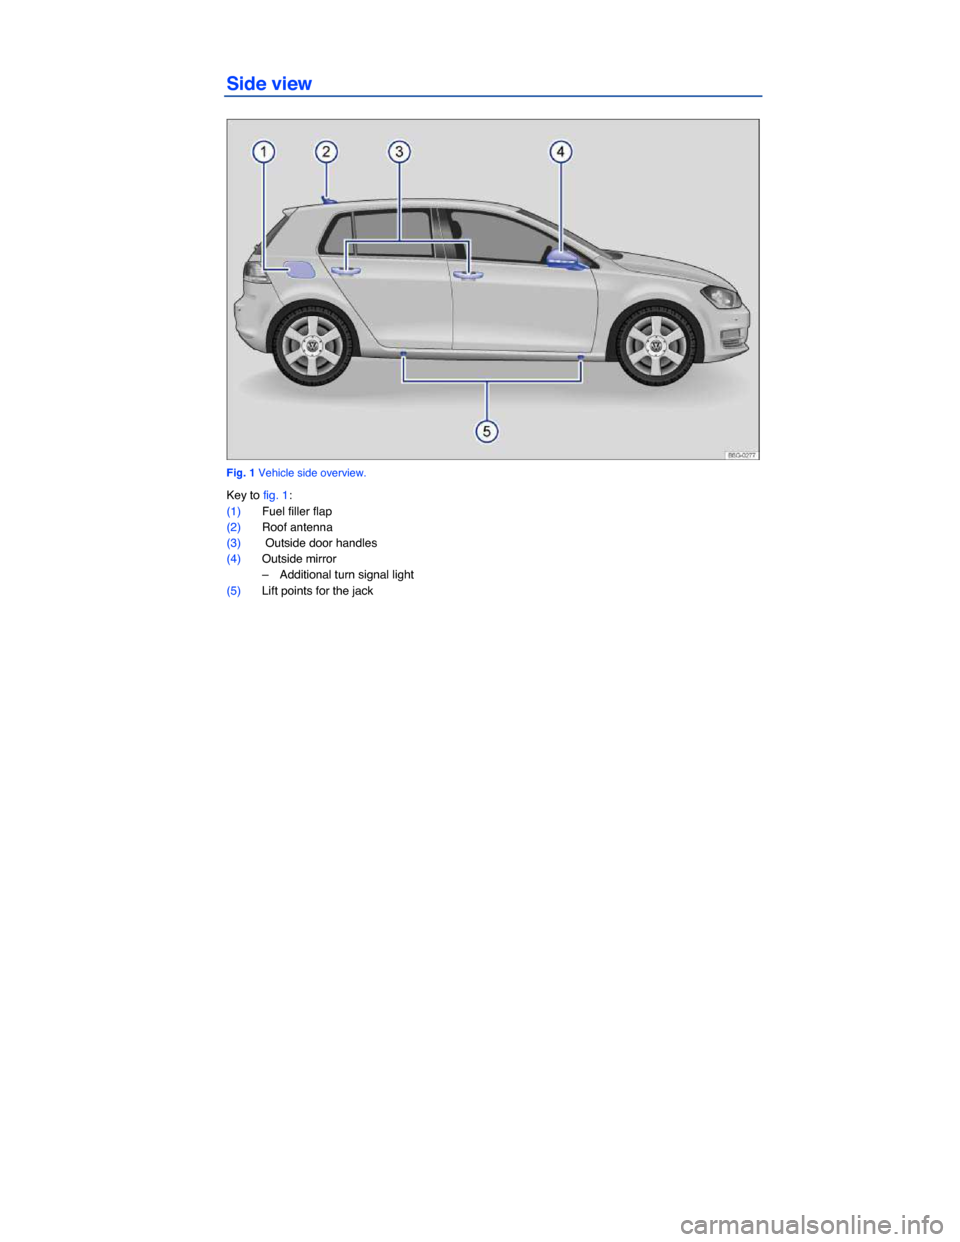 VOLKSWAGEN GOLF 2015 5G / 7.G Owners Manual   
Side view 
 
Fig. 1 Vehicle side overview. 
Key to fig. 1: 
(1) Fuel filler flap 
(2) Roof antenna  
(3)  Outside door handles  
(4) Outside mirror  
–  Additional turn signal light  
(5) Lift po